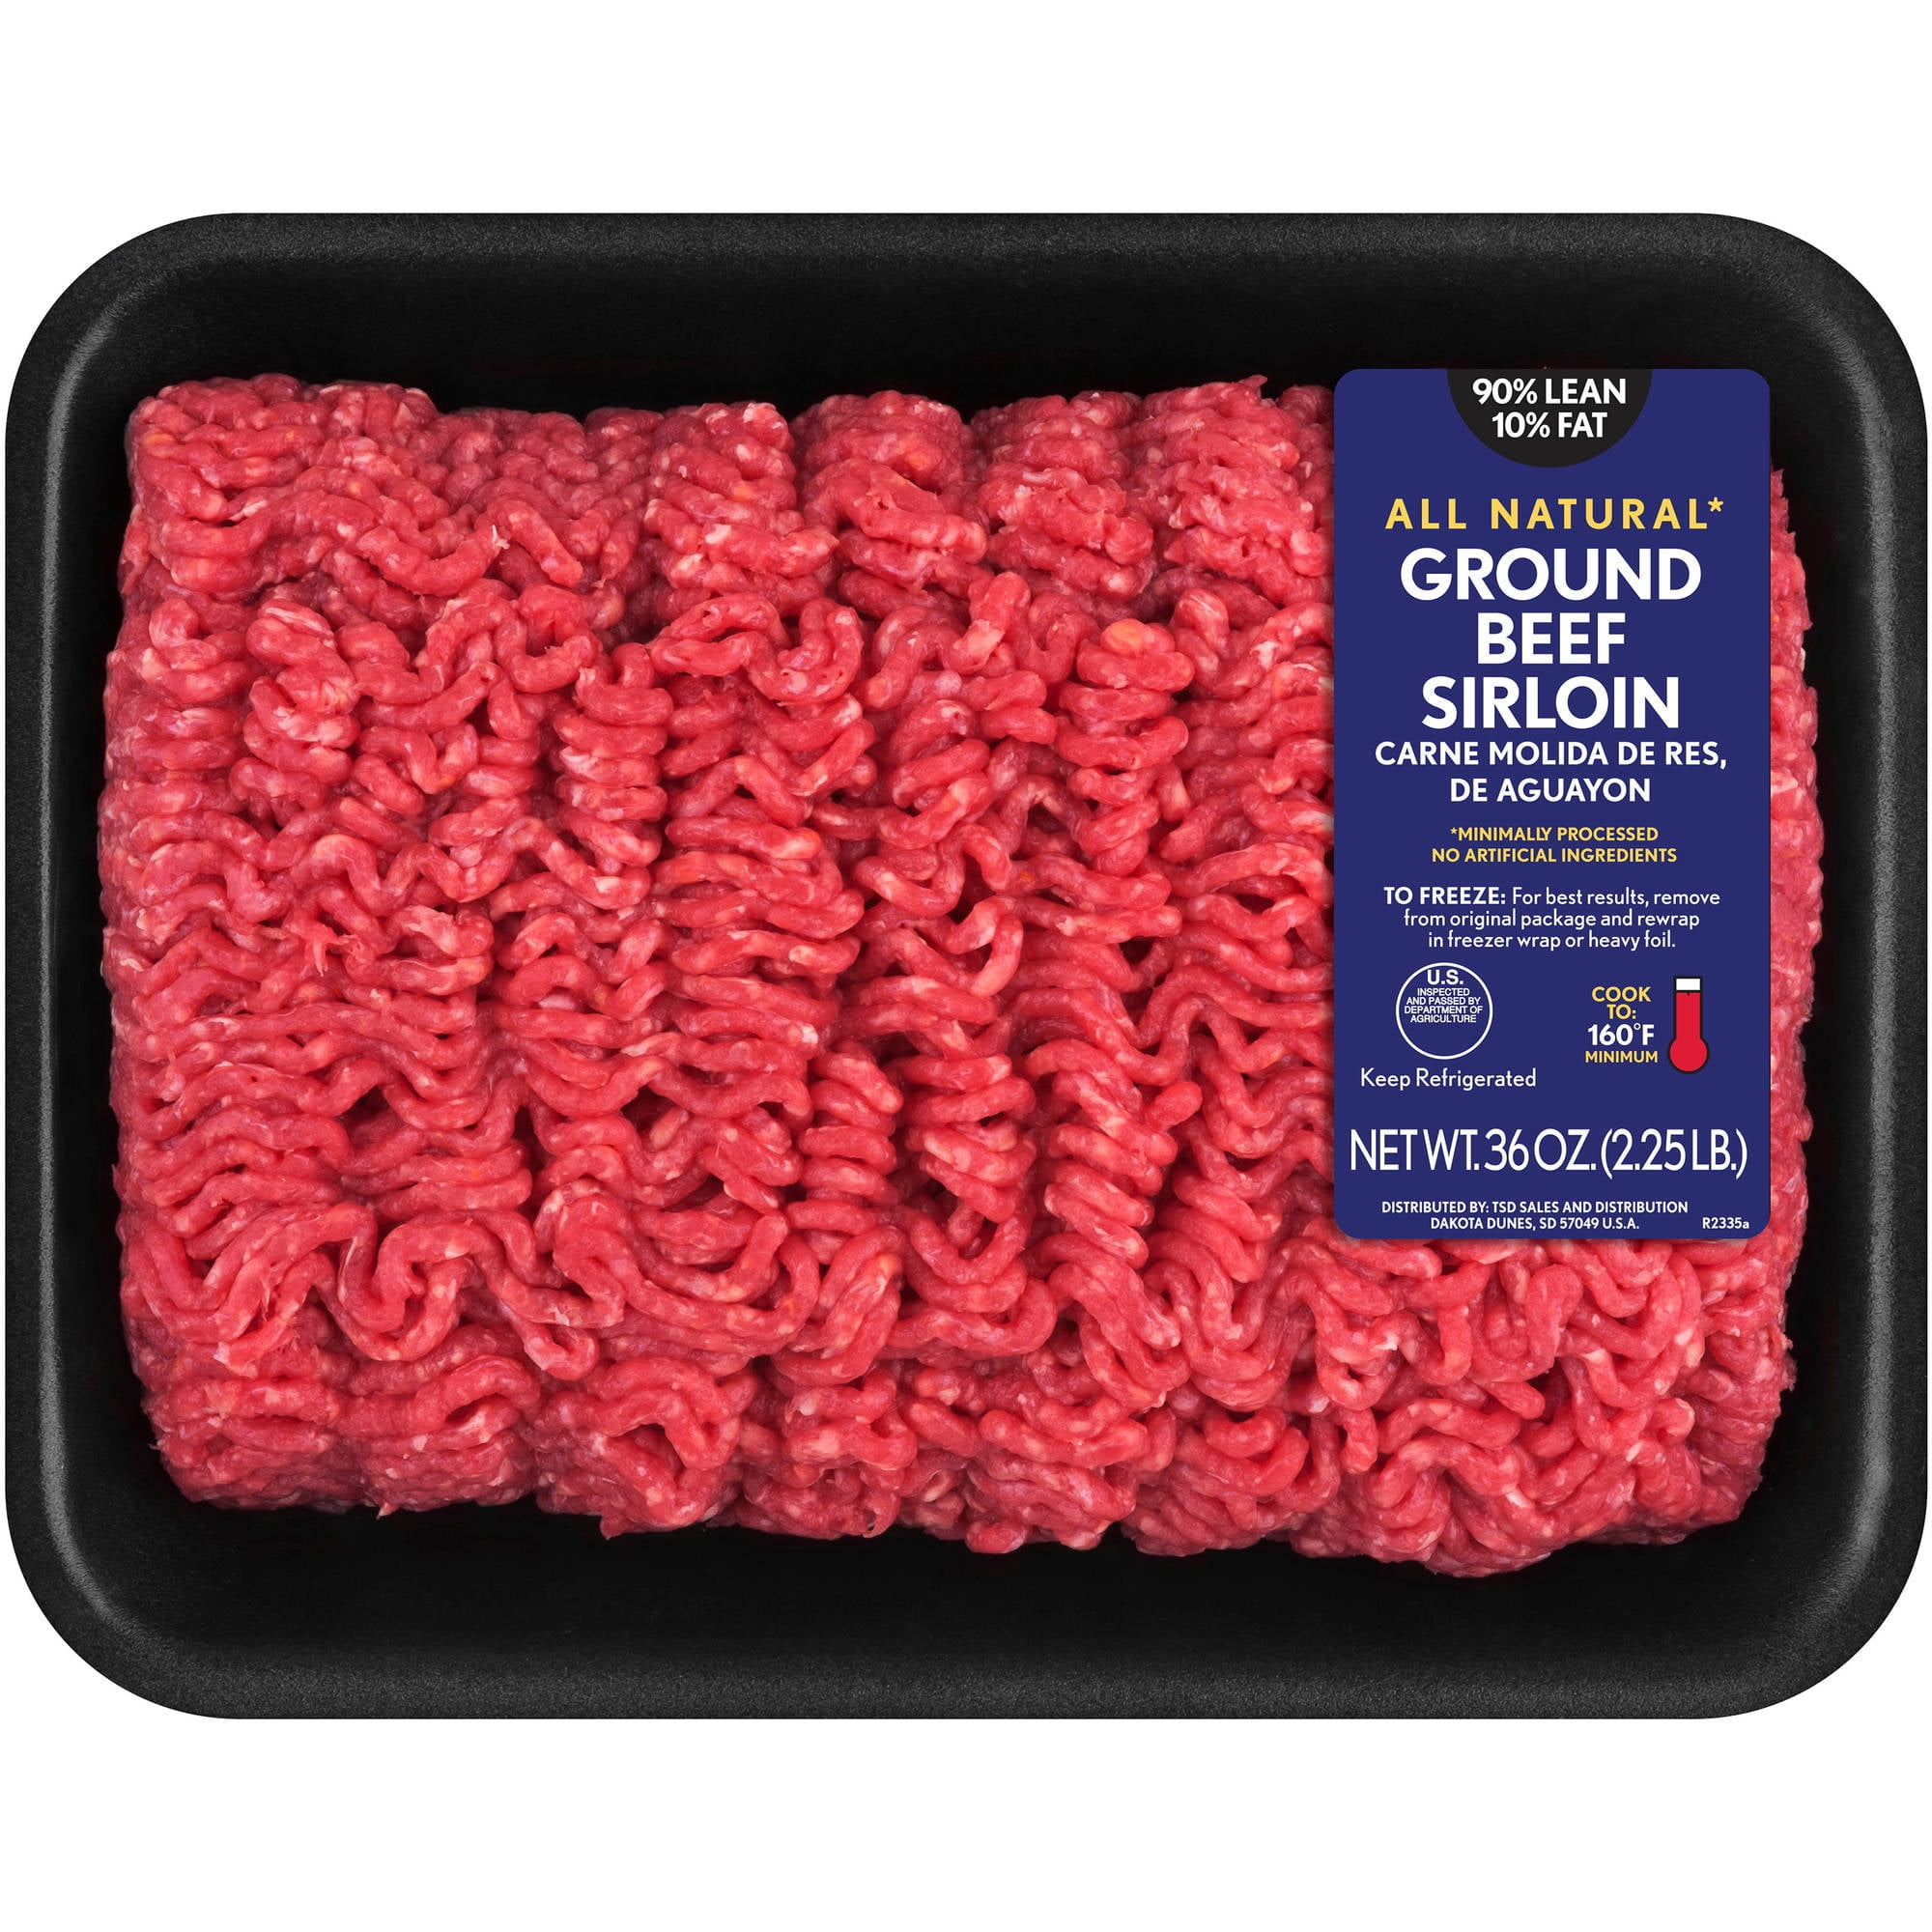 96 Lean4 Fat Extra Lean Ground Beef 1 Lb Walmart within Nutrition Facts 90 Lean Ground Beef